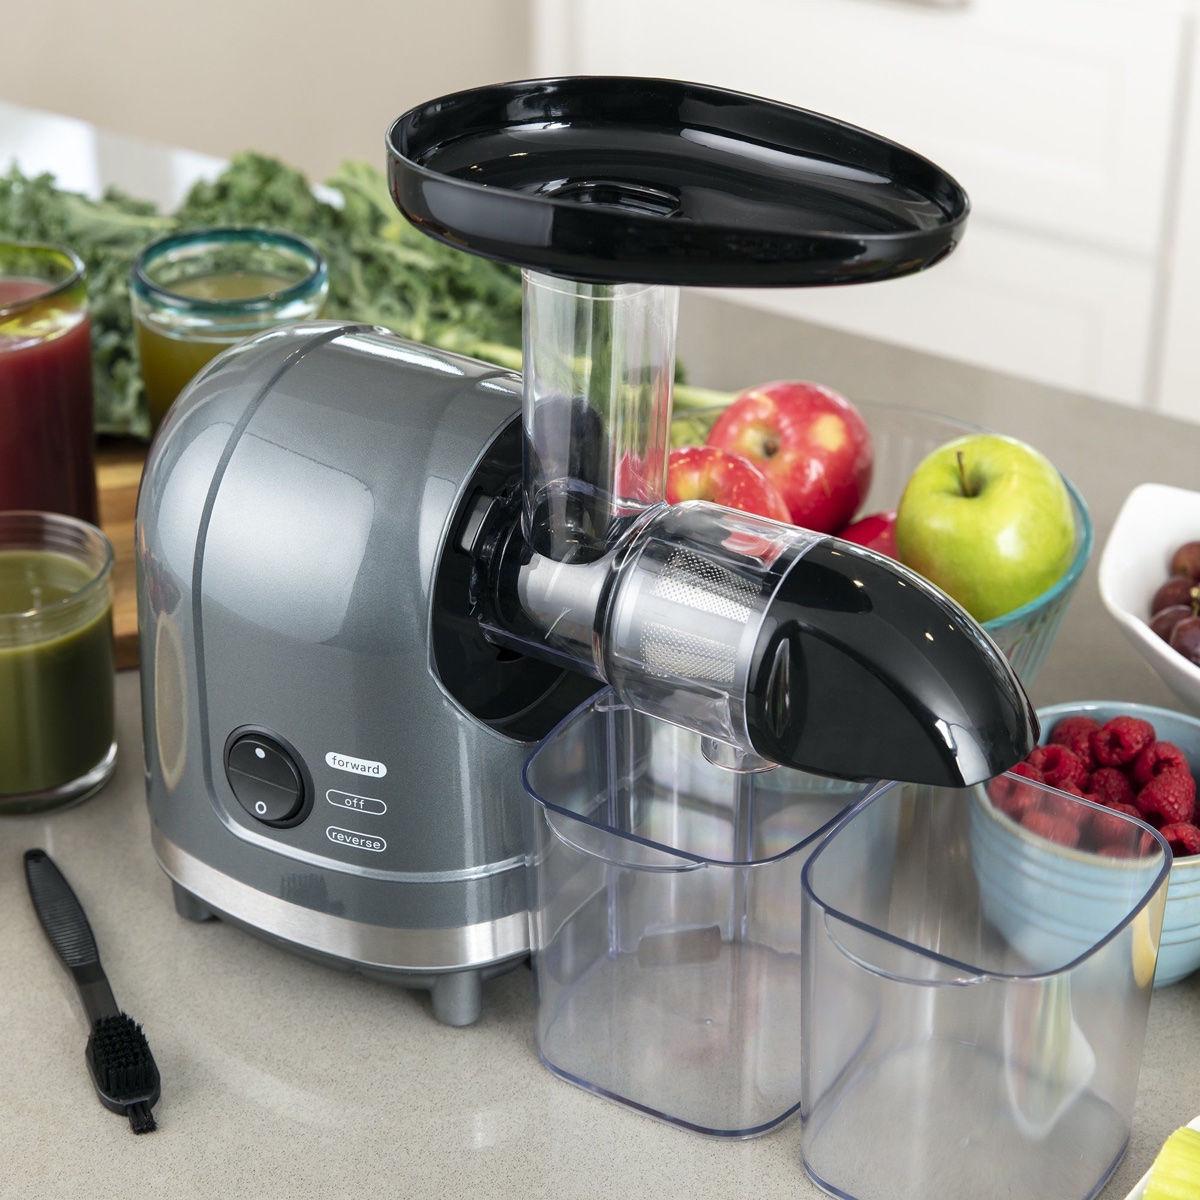 What Is The Best Masticating Juicer